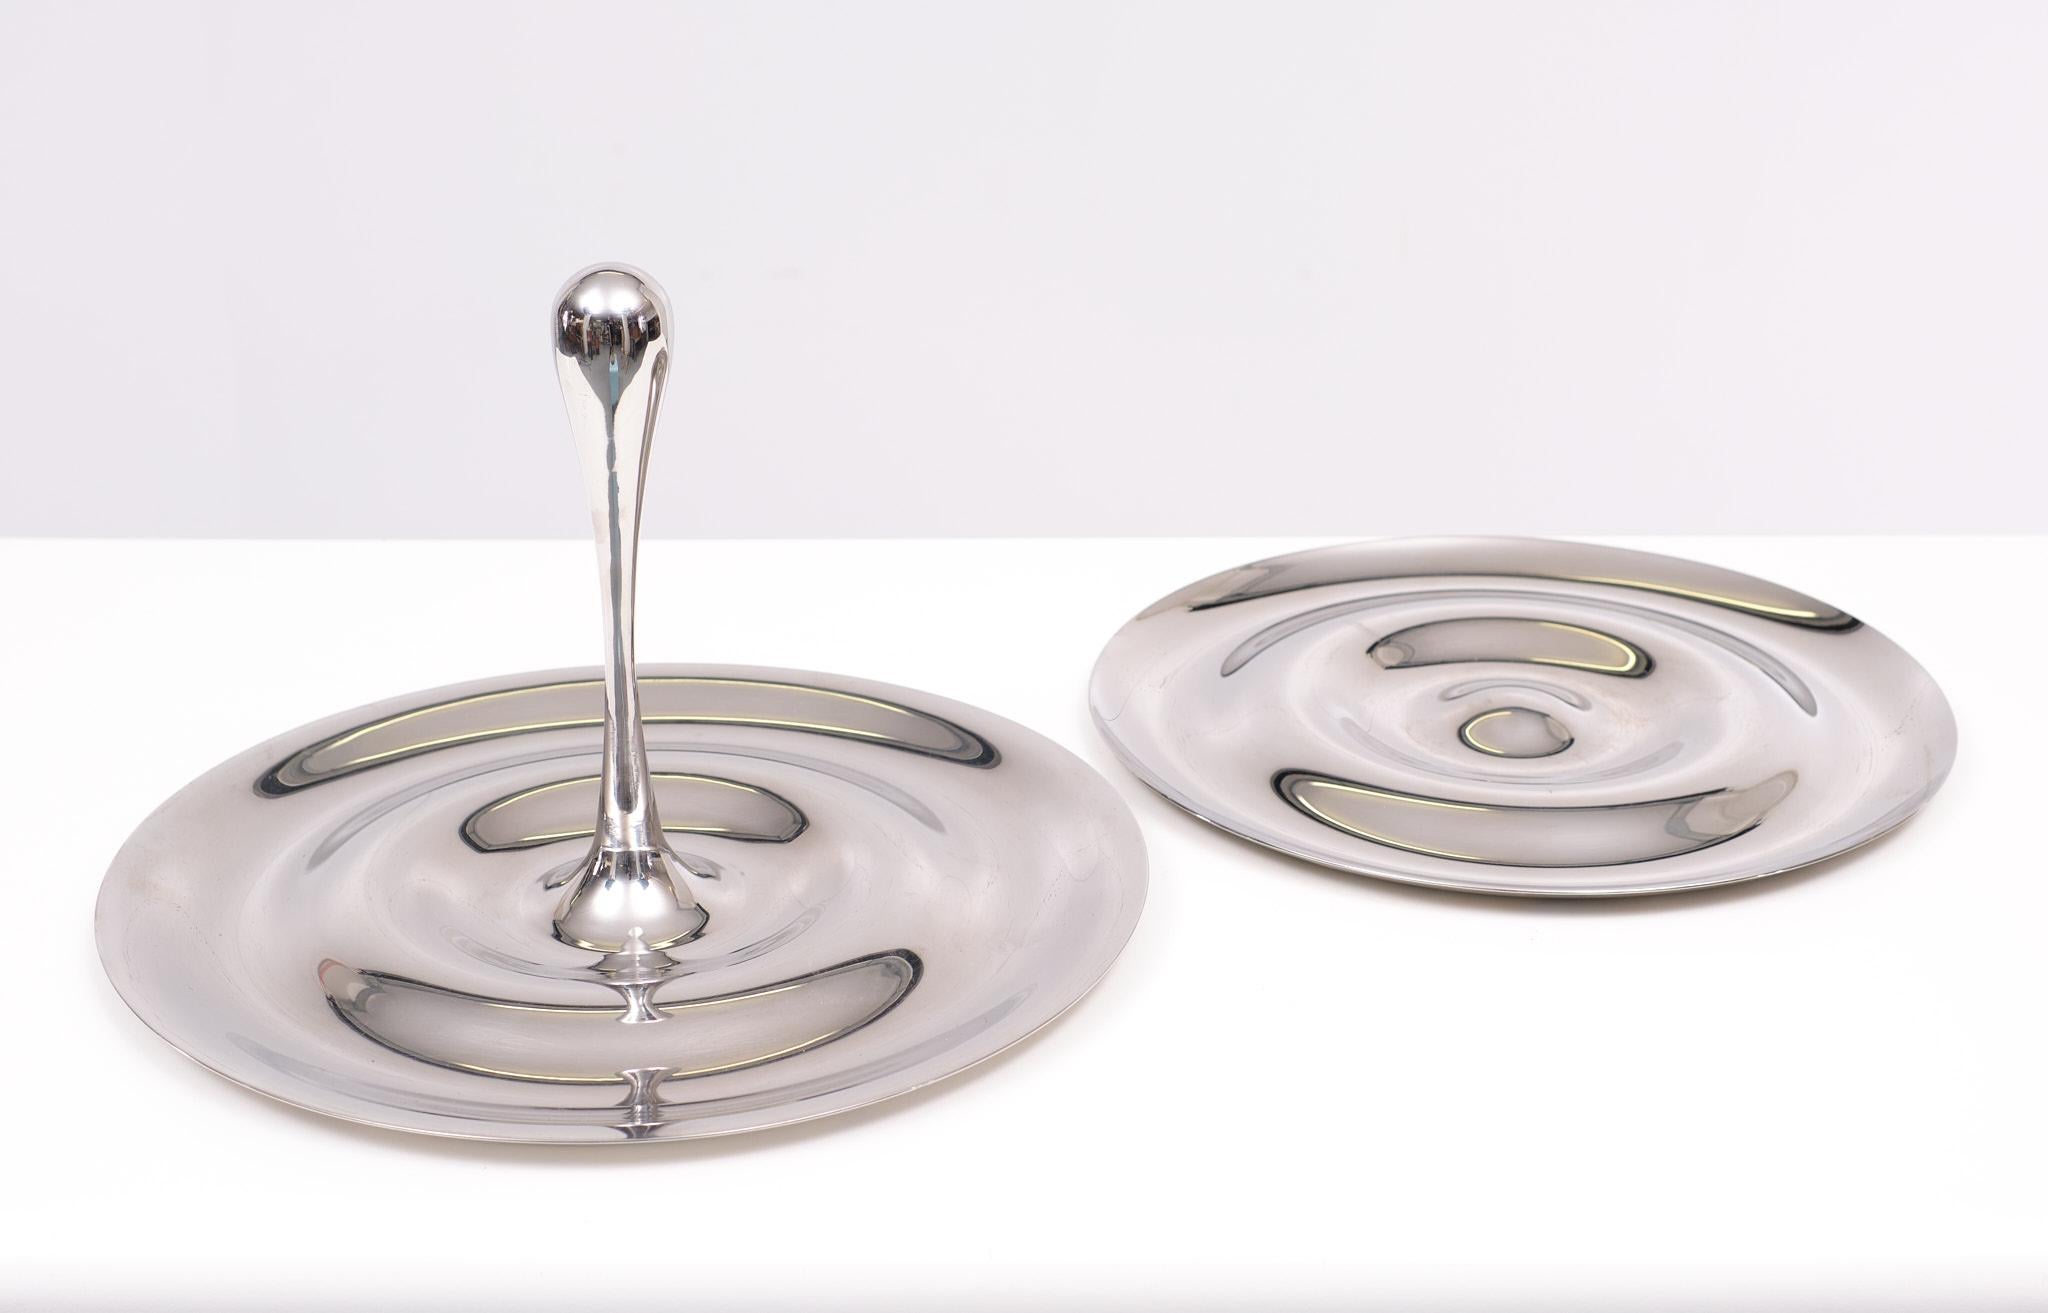 The design inspired by nature: a drip falling into the water where it causes ripples.
Manufacturer: RoyalVKB ( Royal van Kempen & Begeer ) period 2000.
Model: Flow Country: Netherlands. Materials: Stainless Steel. 2 pieces. 
 


 
